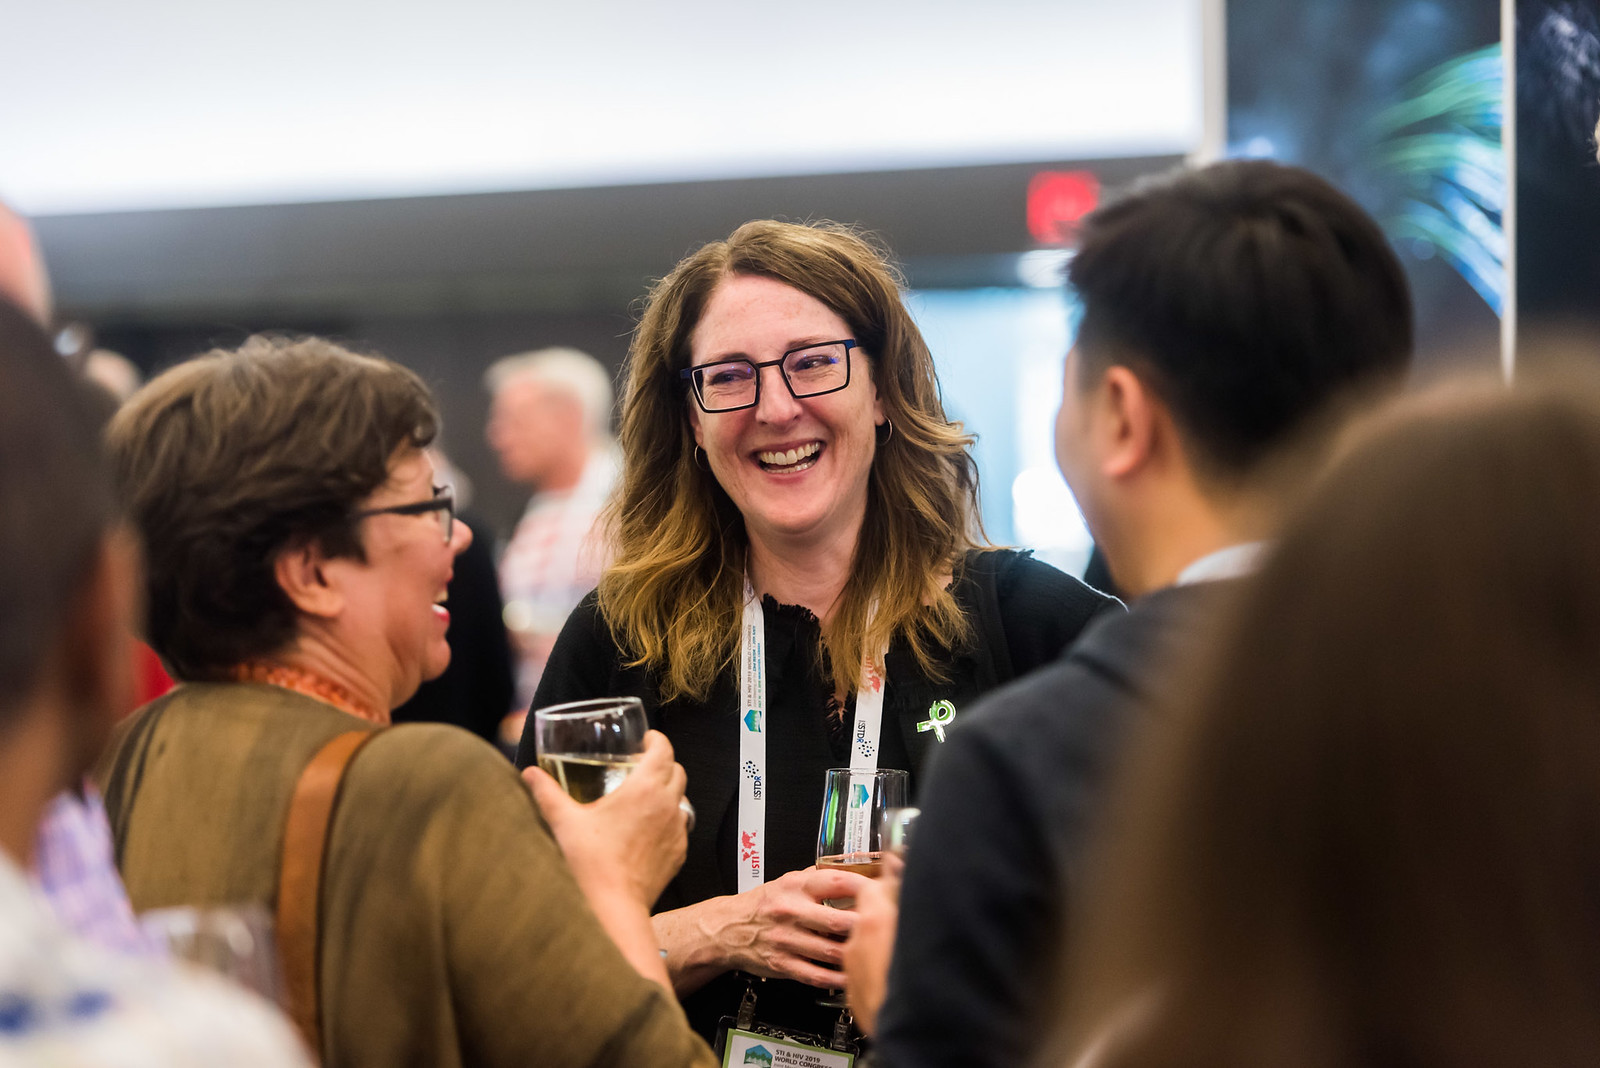 STRIVEBC member Dr. Caroline Cameron at the ISSTDR Welcome Reception. Dr. Cameron presented on syphilis vaccine updates at the STI Vaccines symposium. She also chaired the organization of ISSTDR!